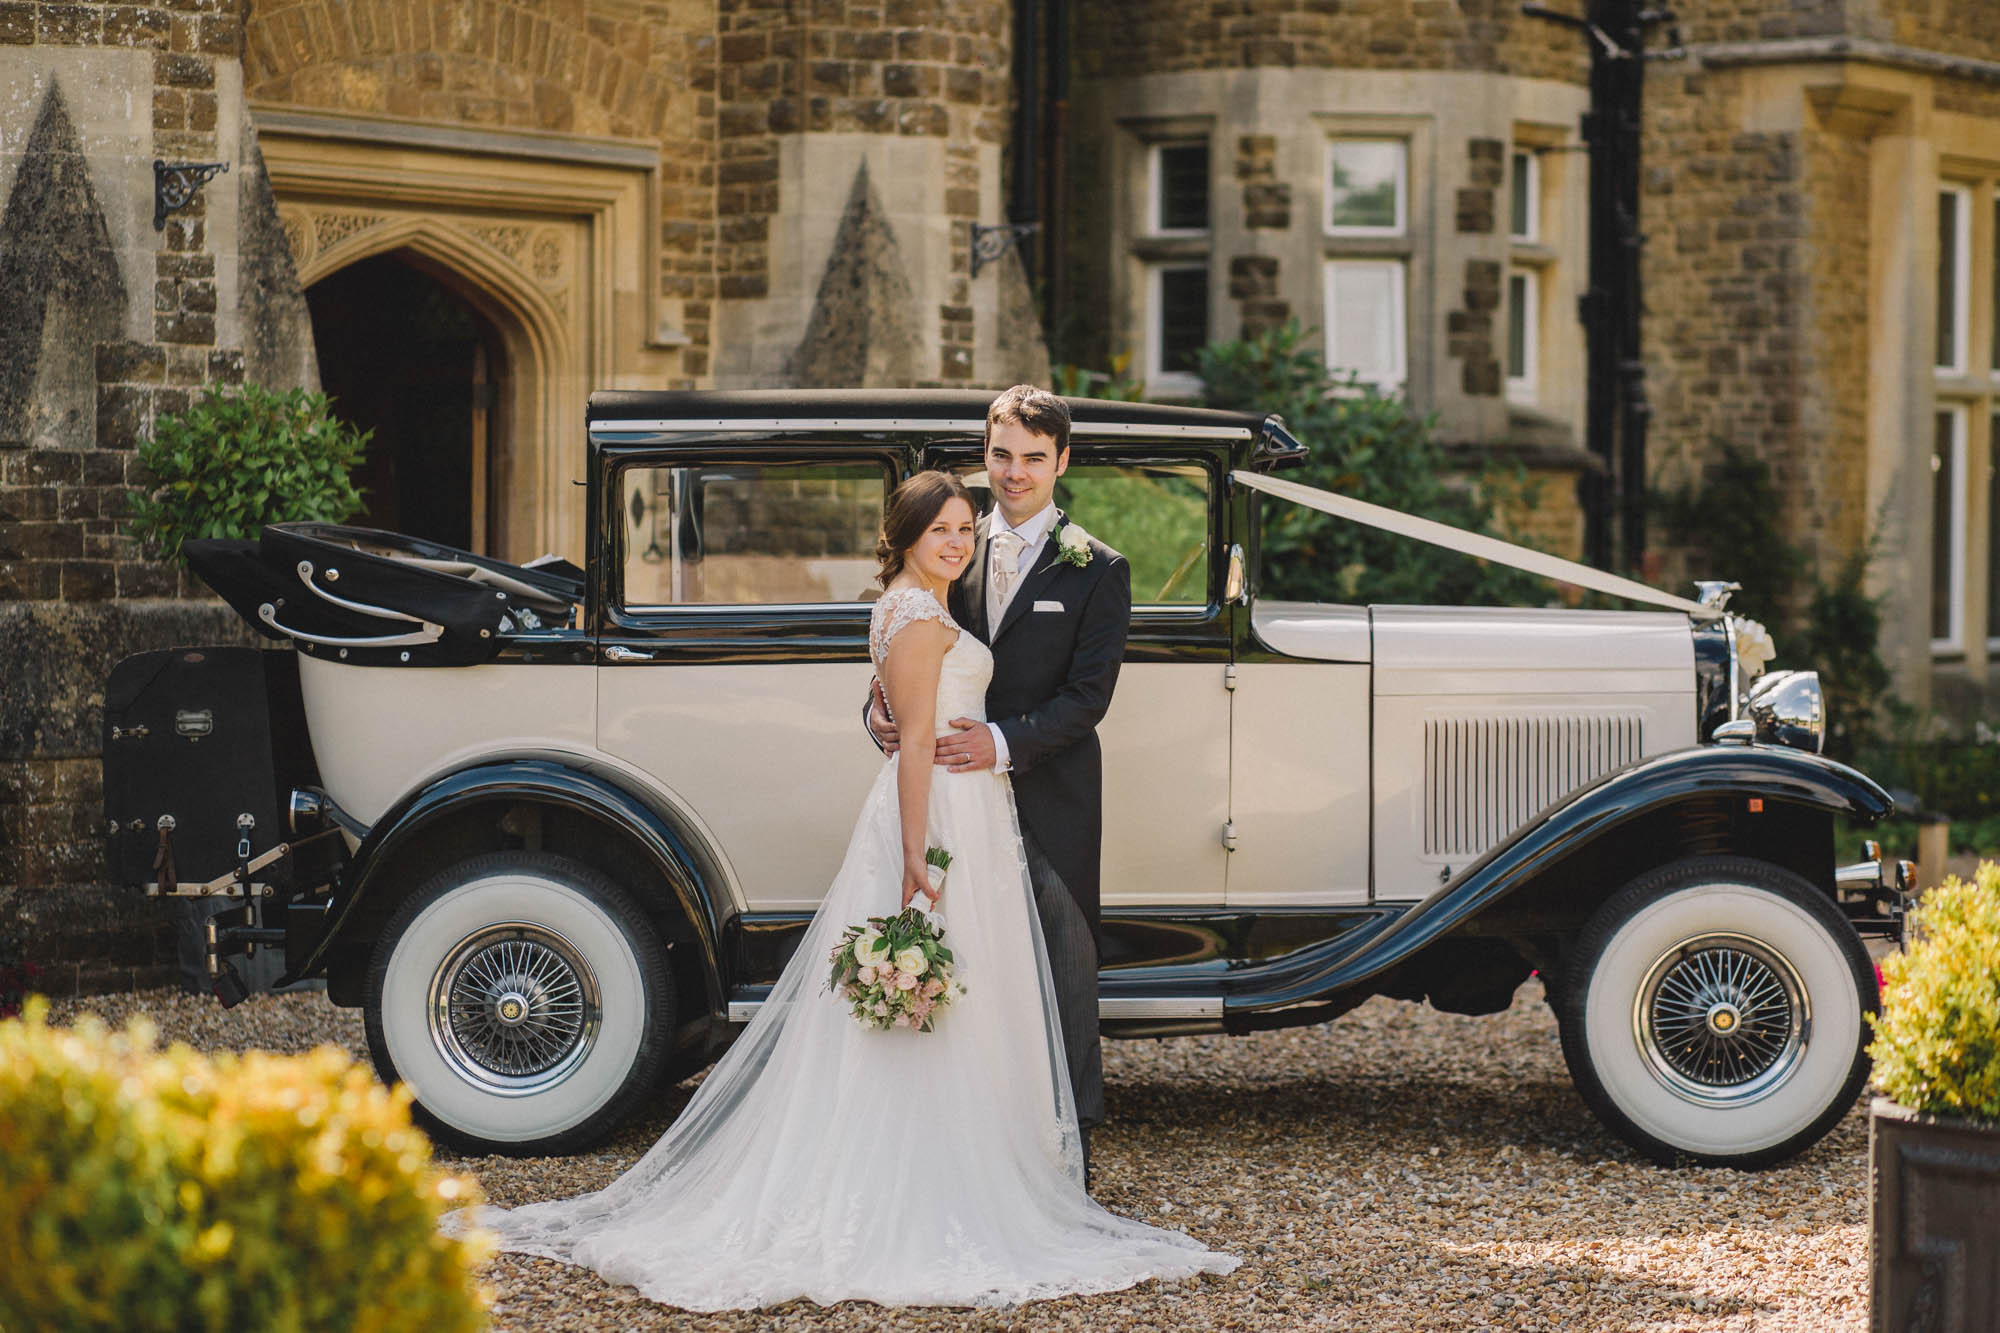 Bride and groom hug closely in front of their Rolls Royce on their wedding day at Hartsfield Manor.